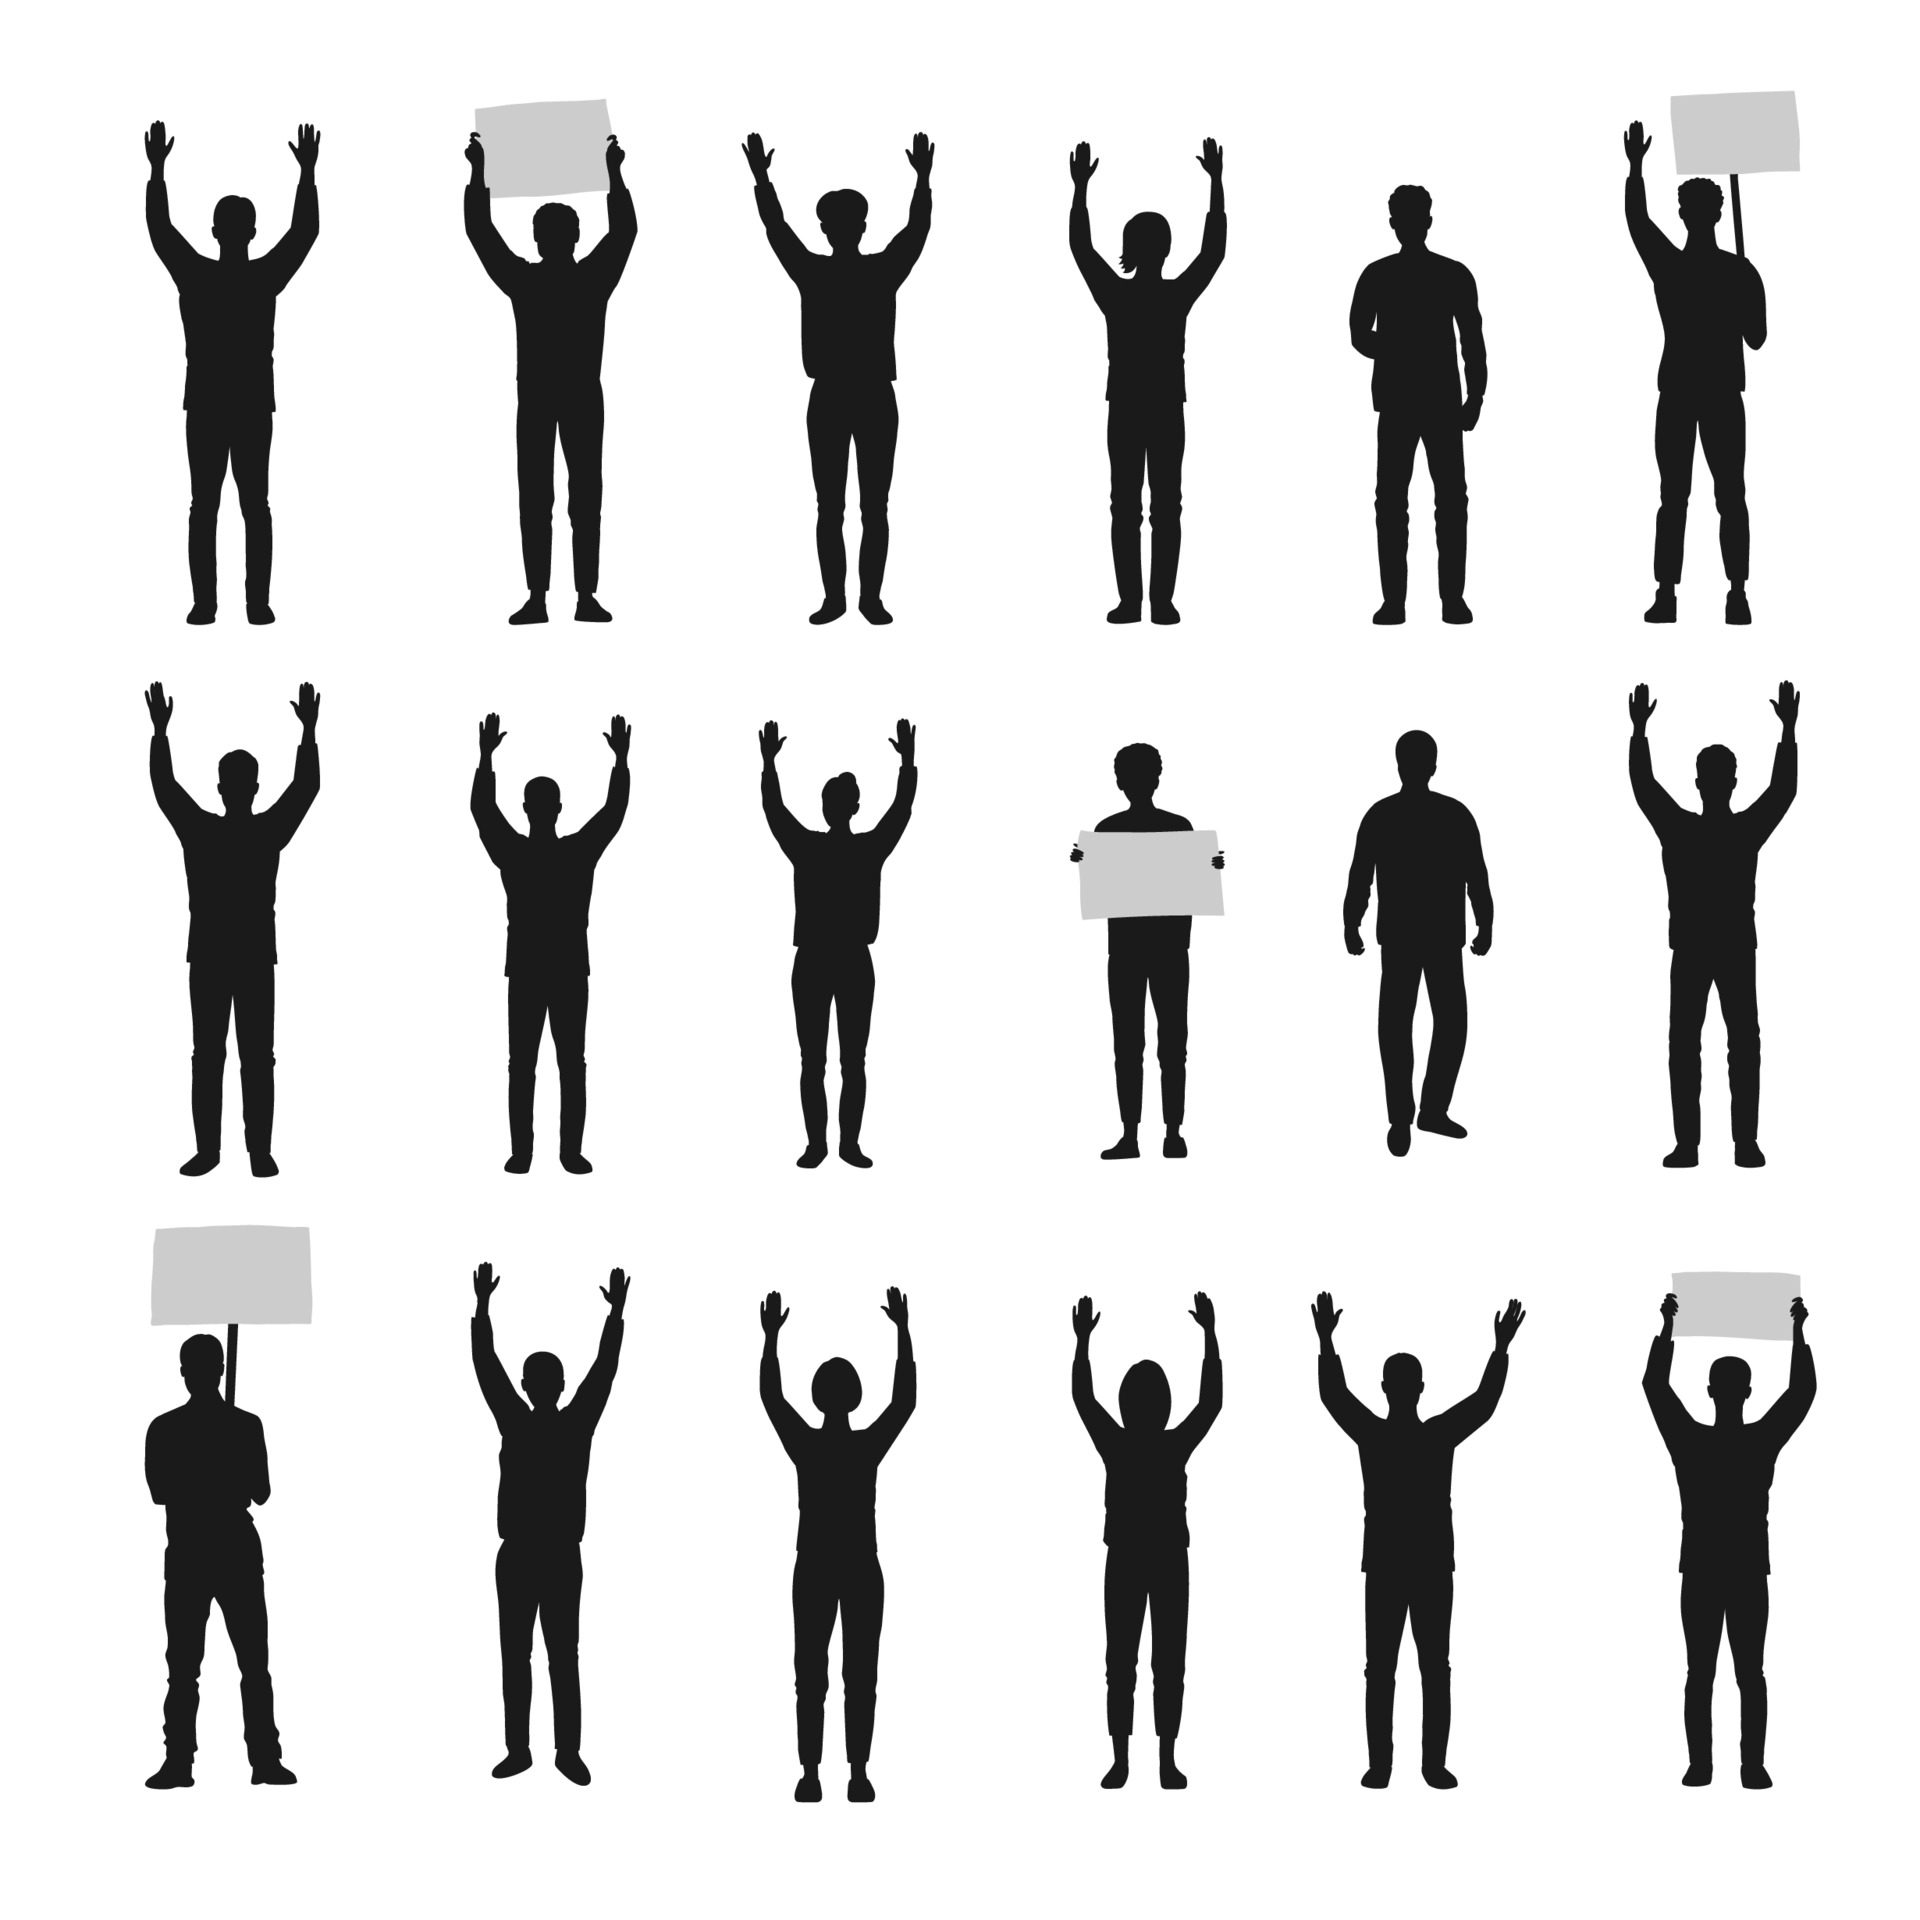 People Hands Up Stock Illustrations – 16,872 People Hands Up Stock